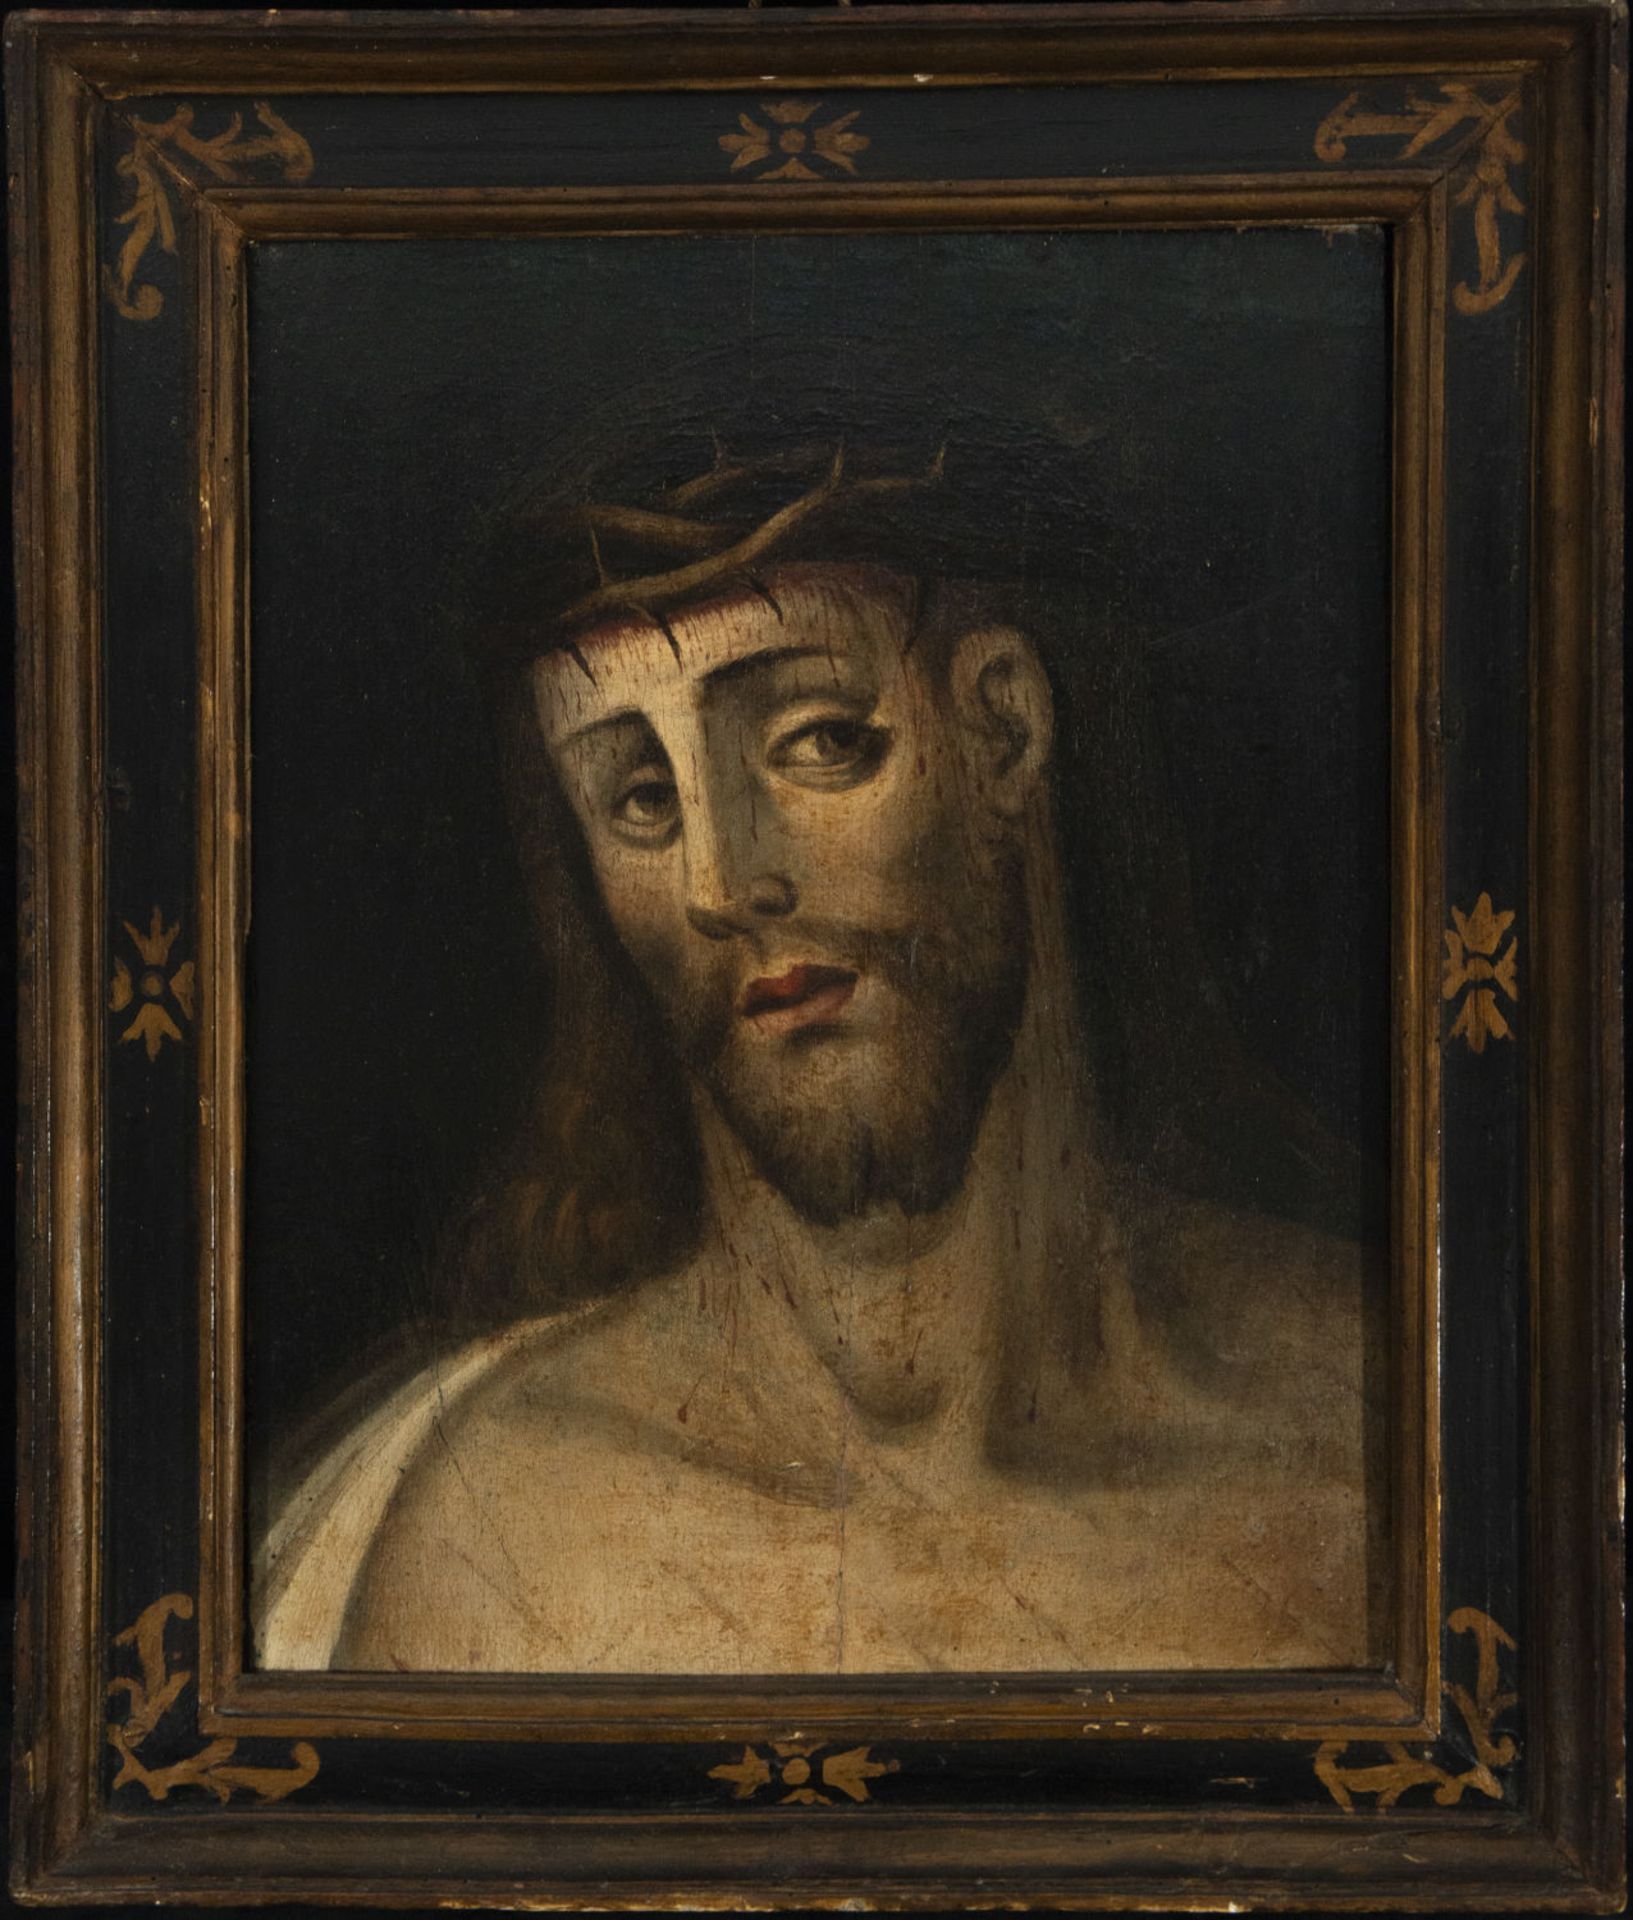 Captive Christ painted in oil on panel, Italo-Flemish Renaissance school from the beginning of the 1